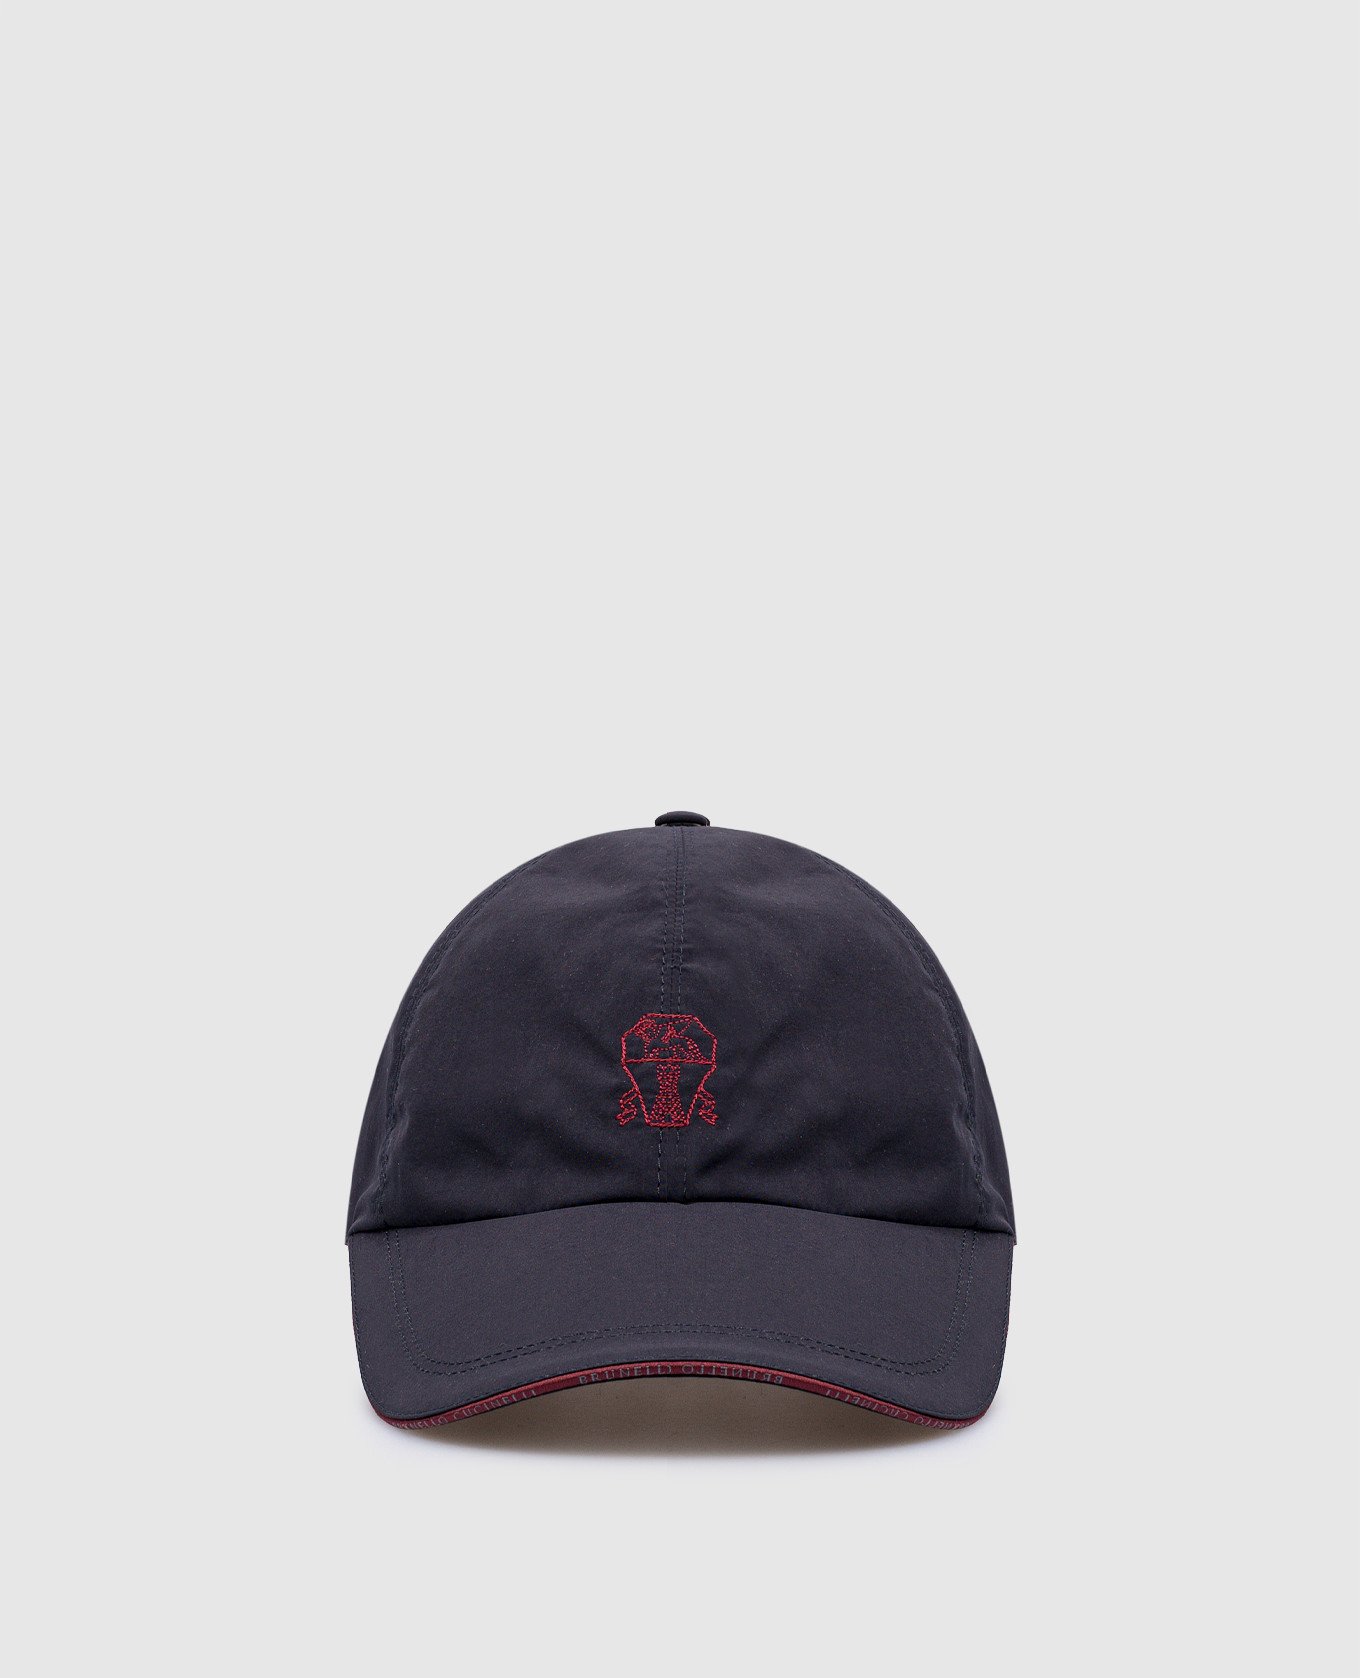 Blue cap with embroidered logo emblem